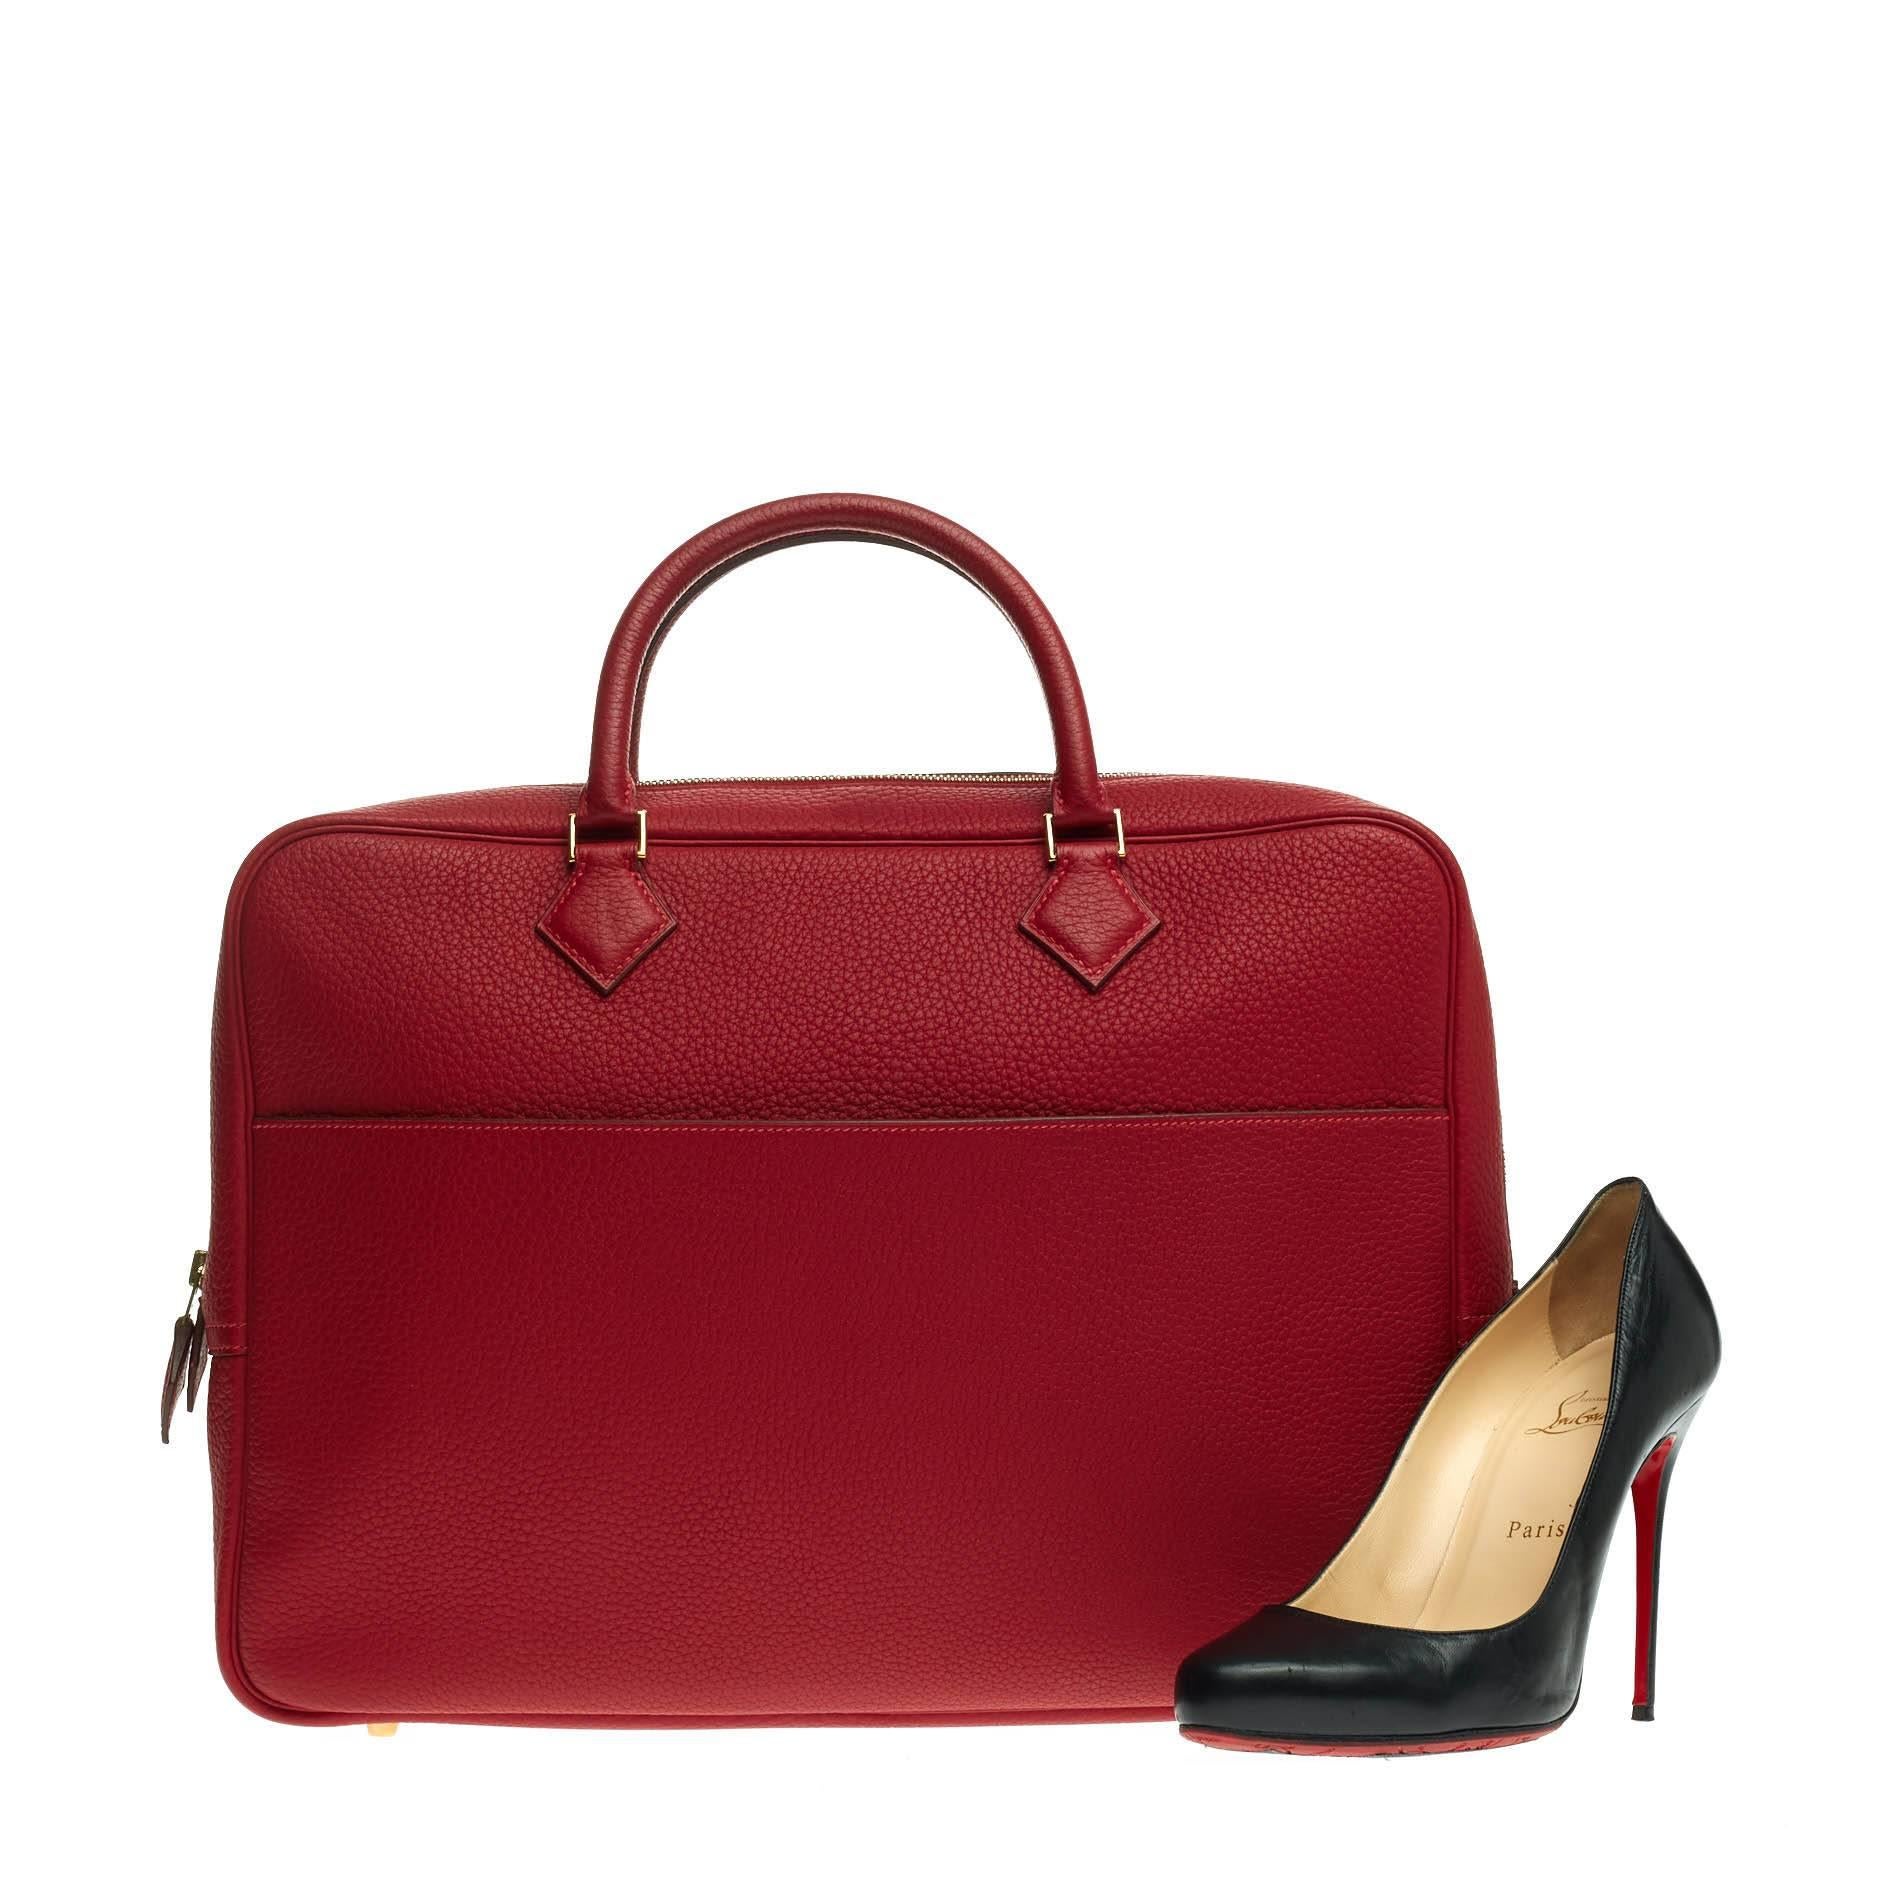 This authentic Hermes Plume Dog Clemence 38 showcases a simple yet chic design perfect for daily excursions and light traveling. Crafted in classic rouge vif red clemence leather, this discontinued, elegant travel piece features dual-rolled leather